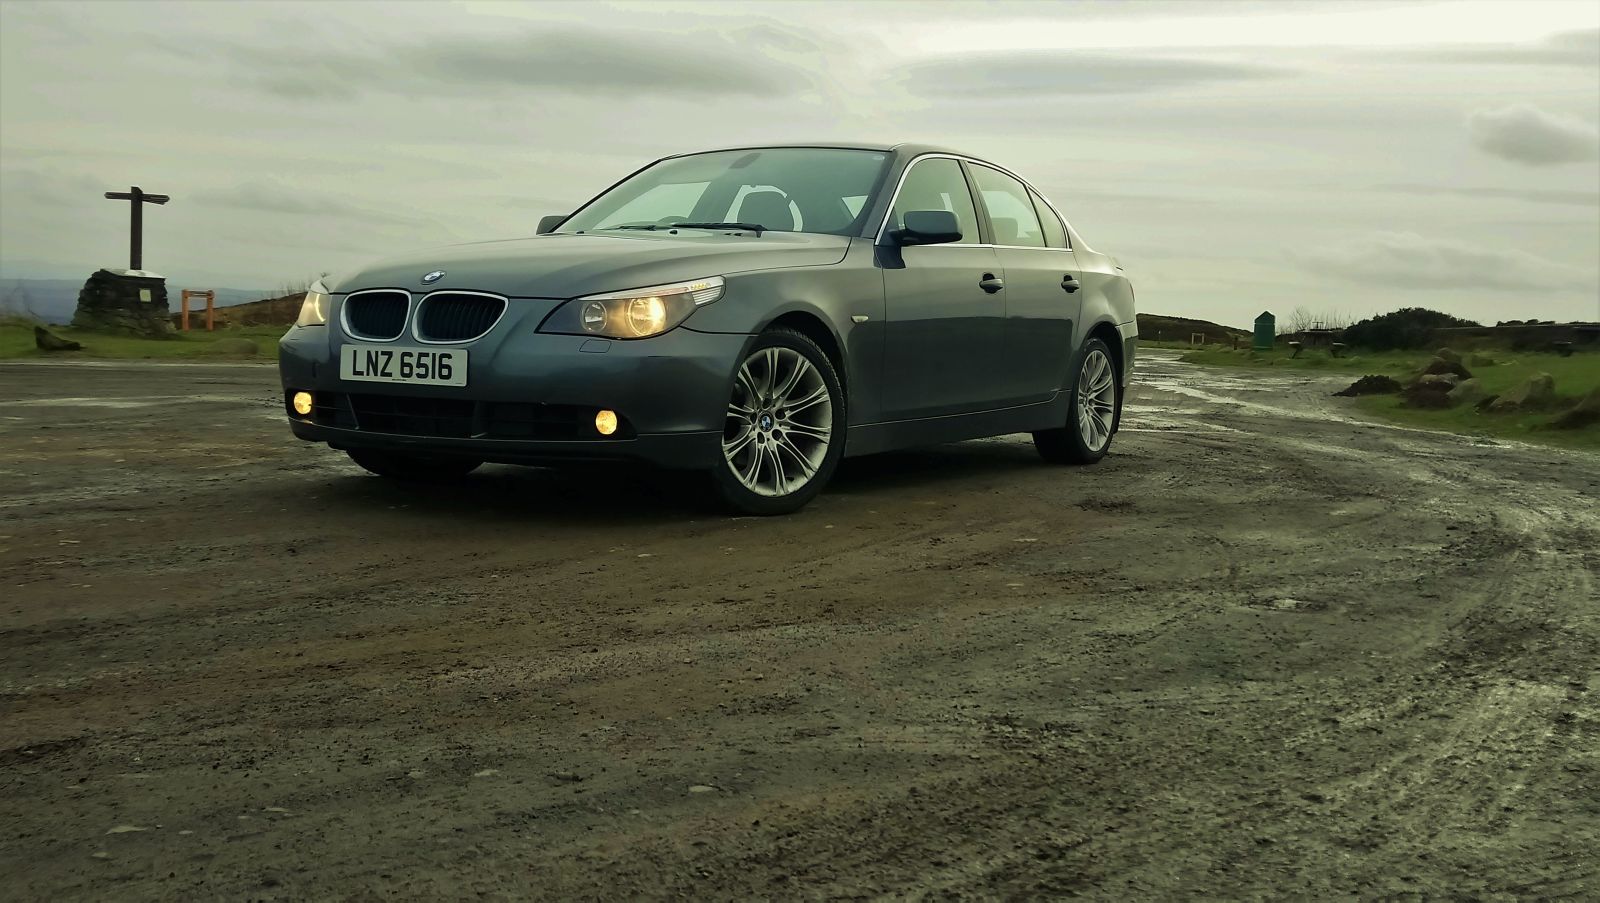 Illustration for article titled Cheapest E60 BMW 525d in Scotland: What do you want to know?